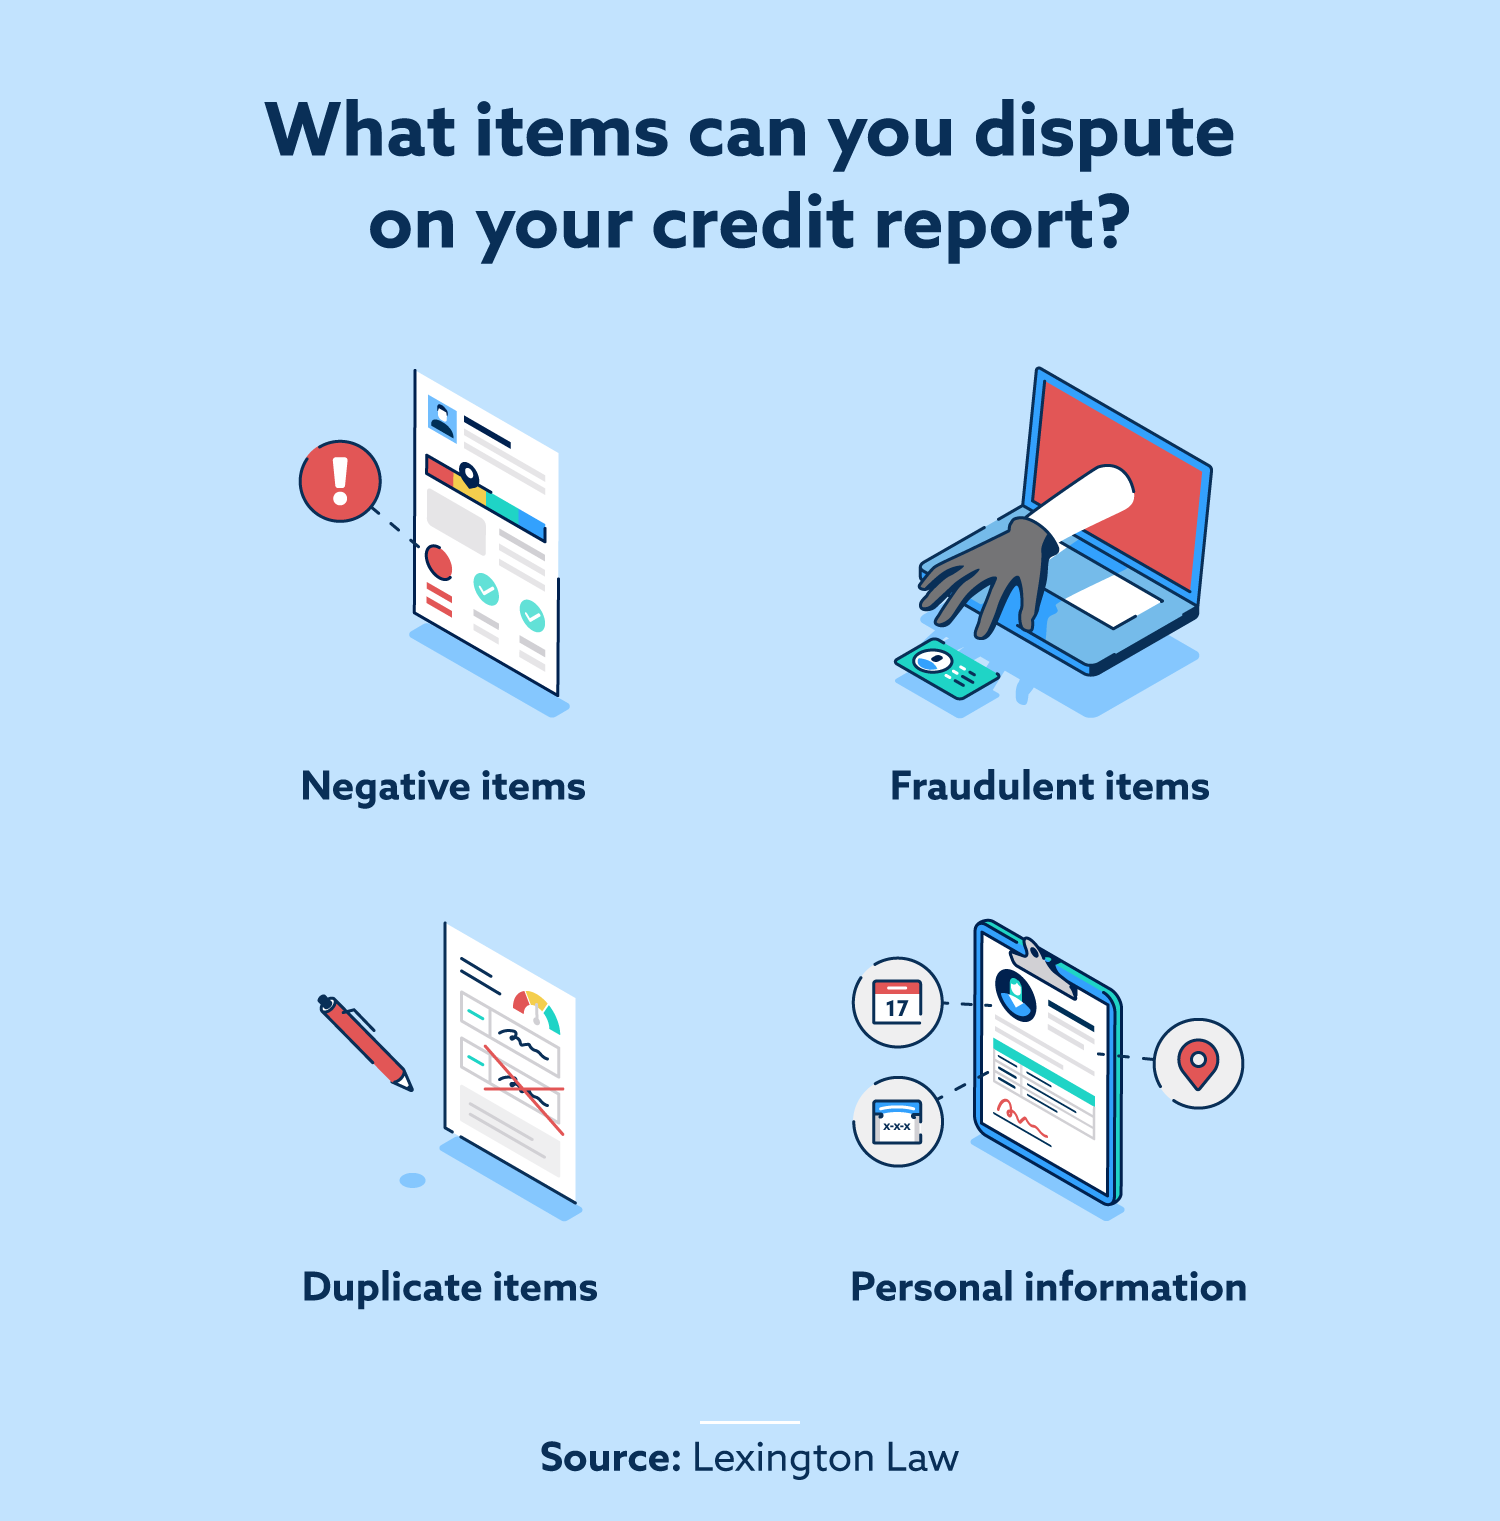 What items can you dispute on your credit report?